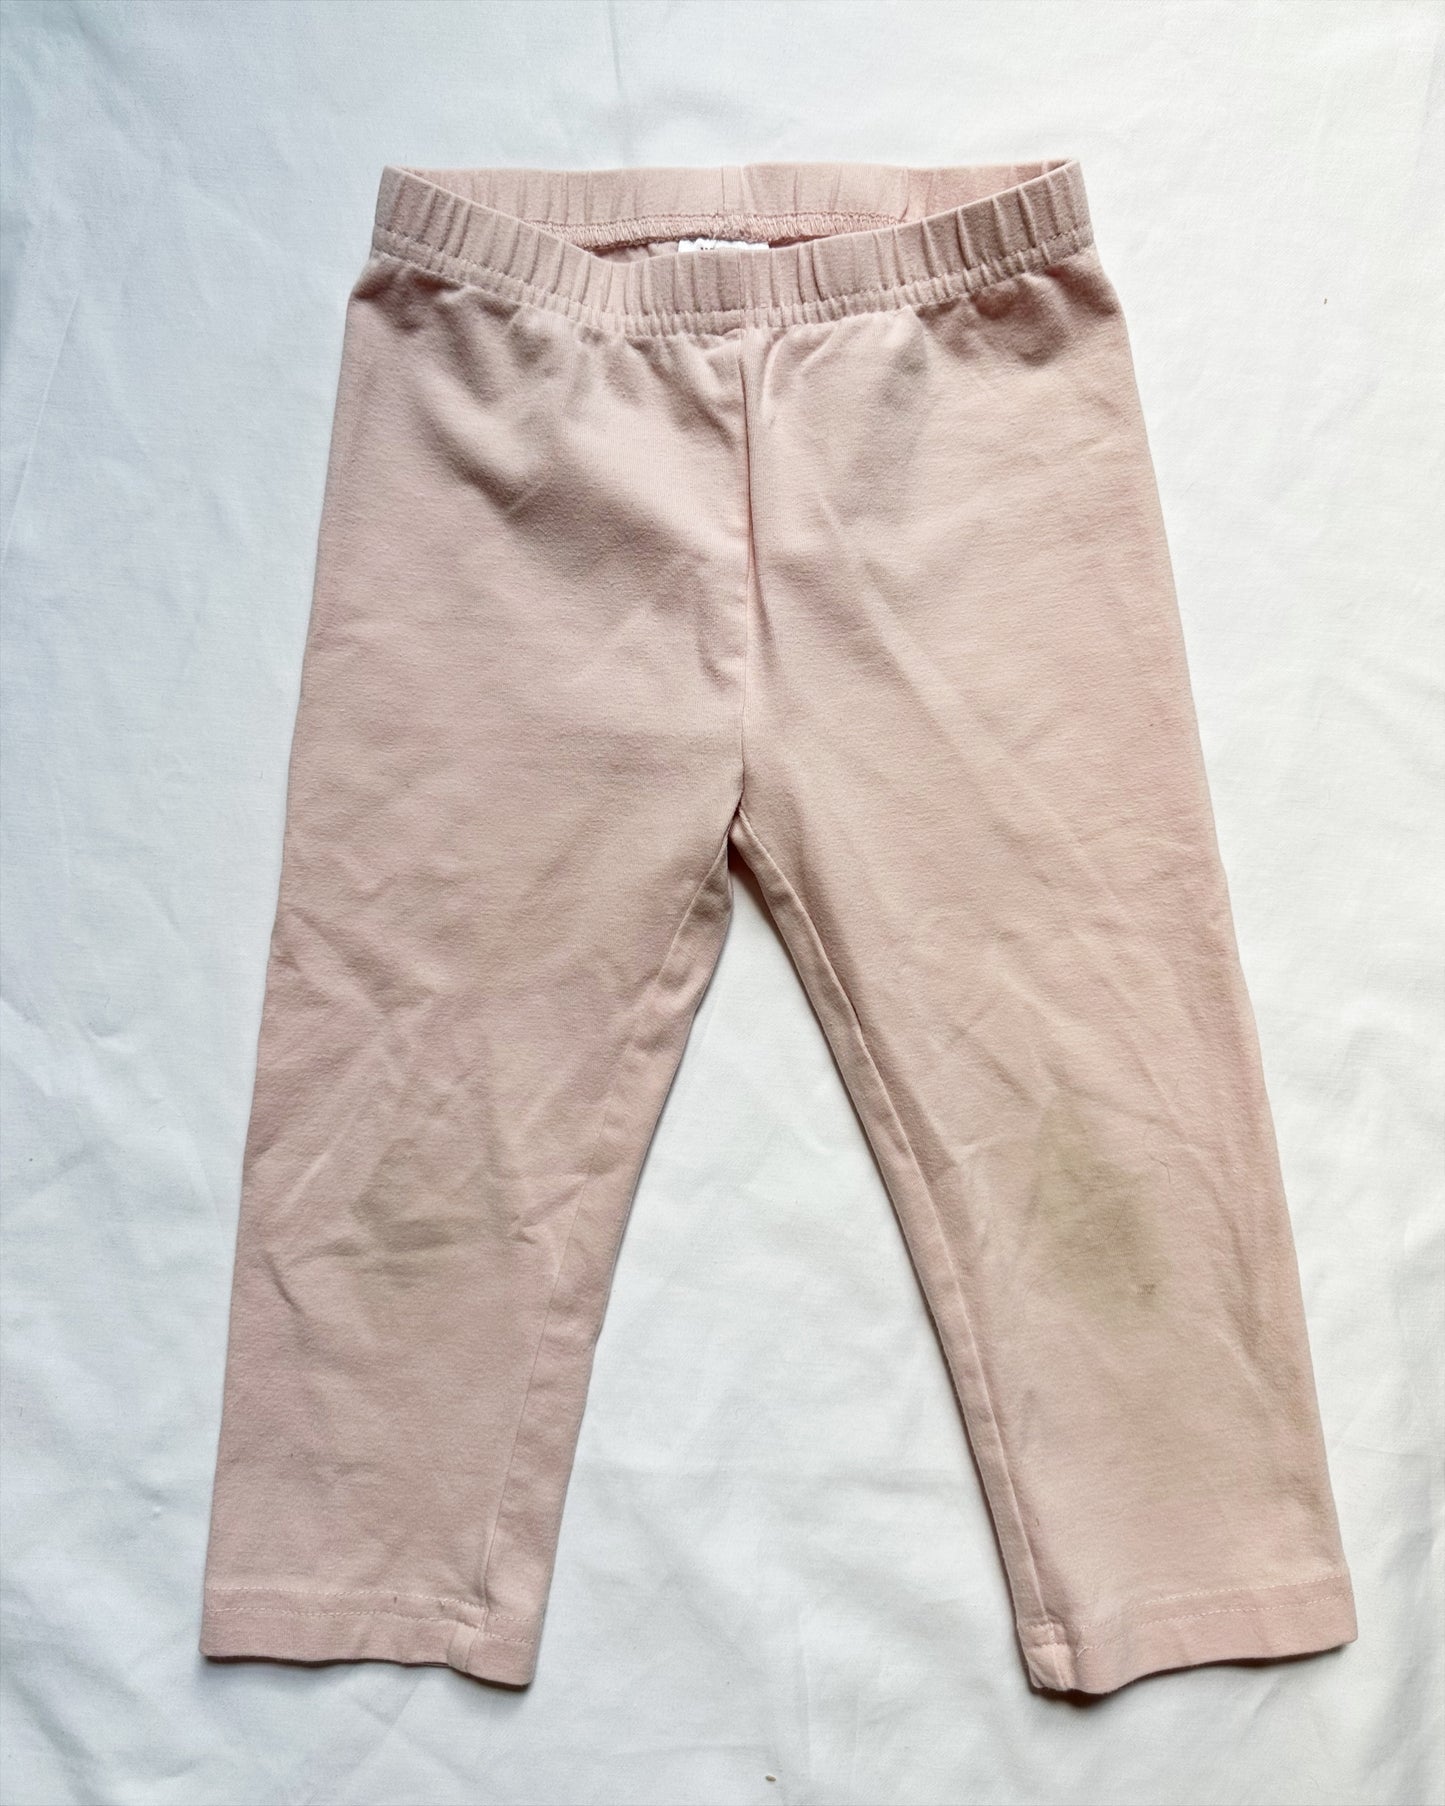 Hanna andersson capris pants pink girls size 5